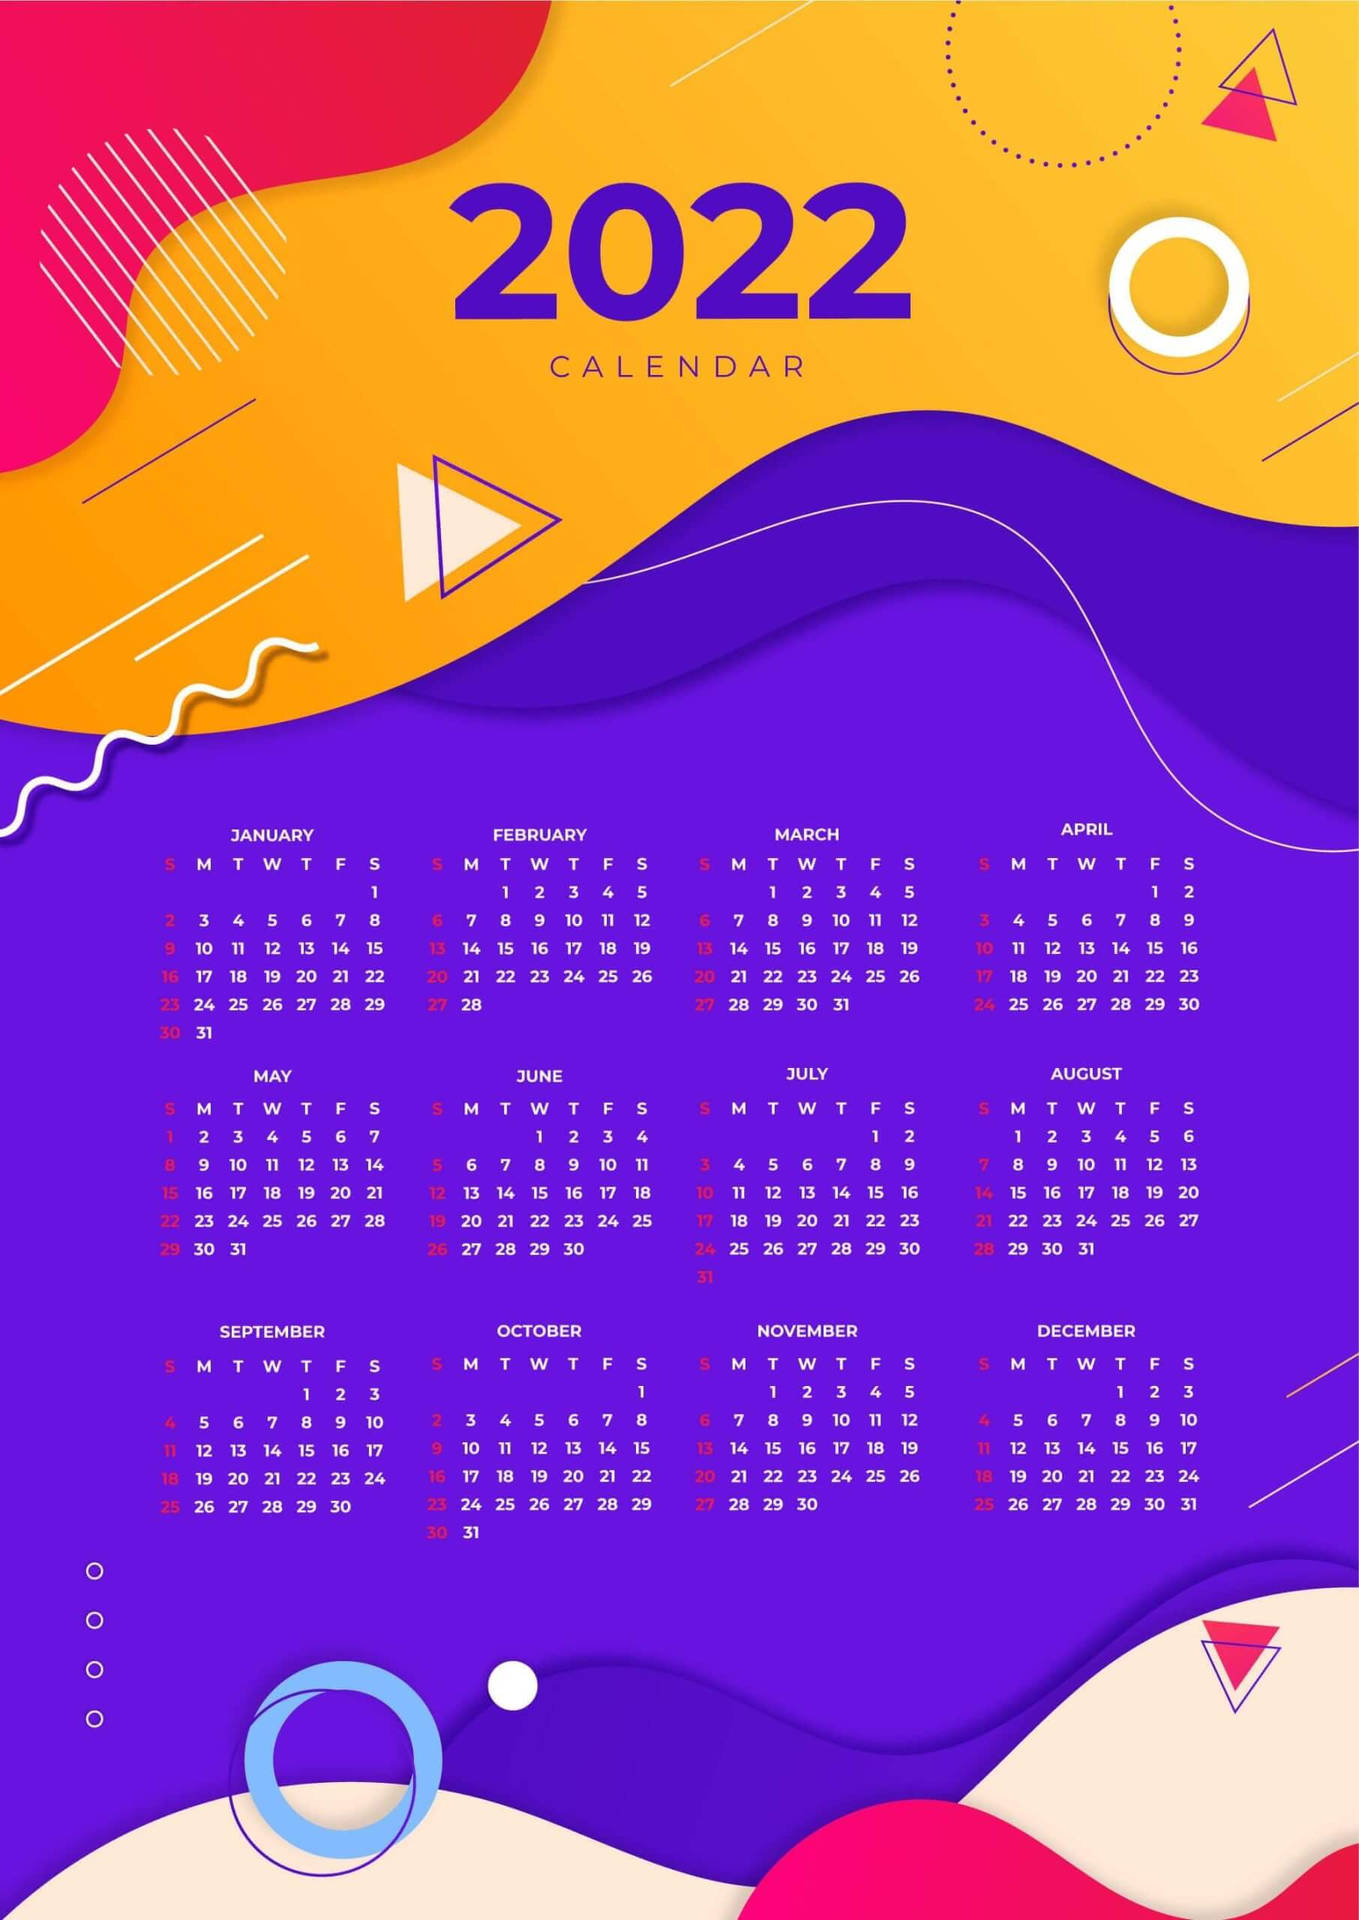 2022 Calendar With Shapes Wallpaper